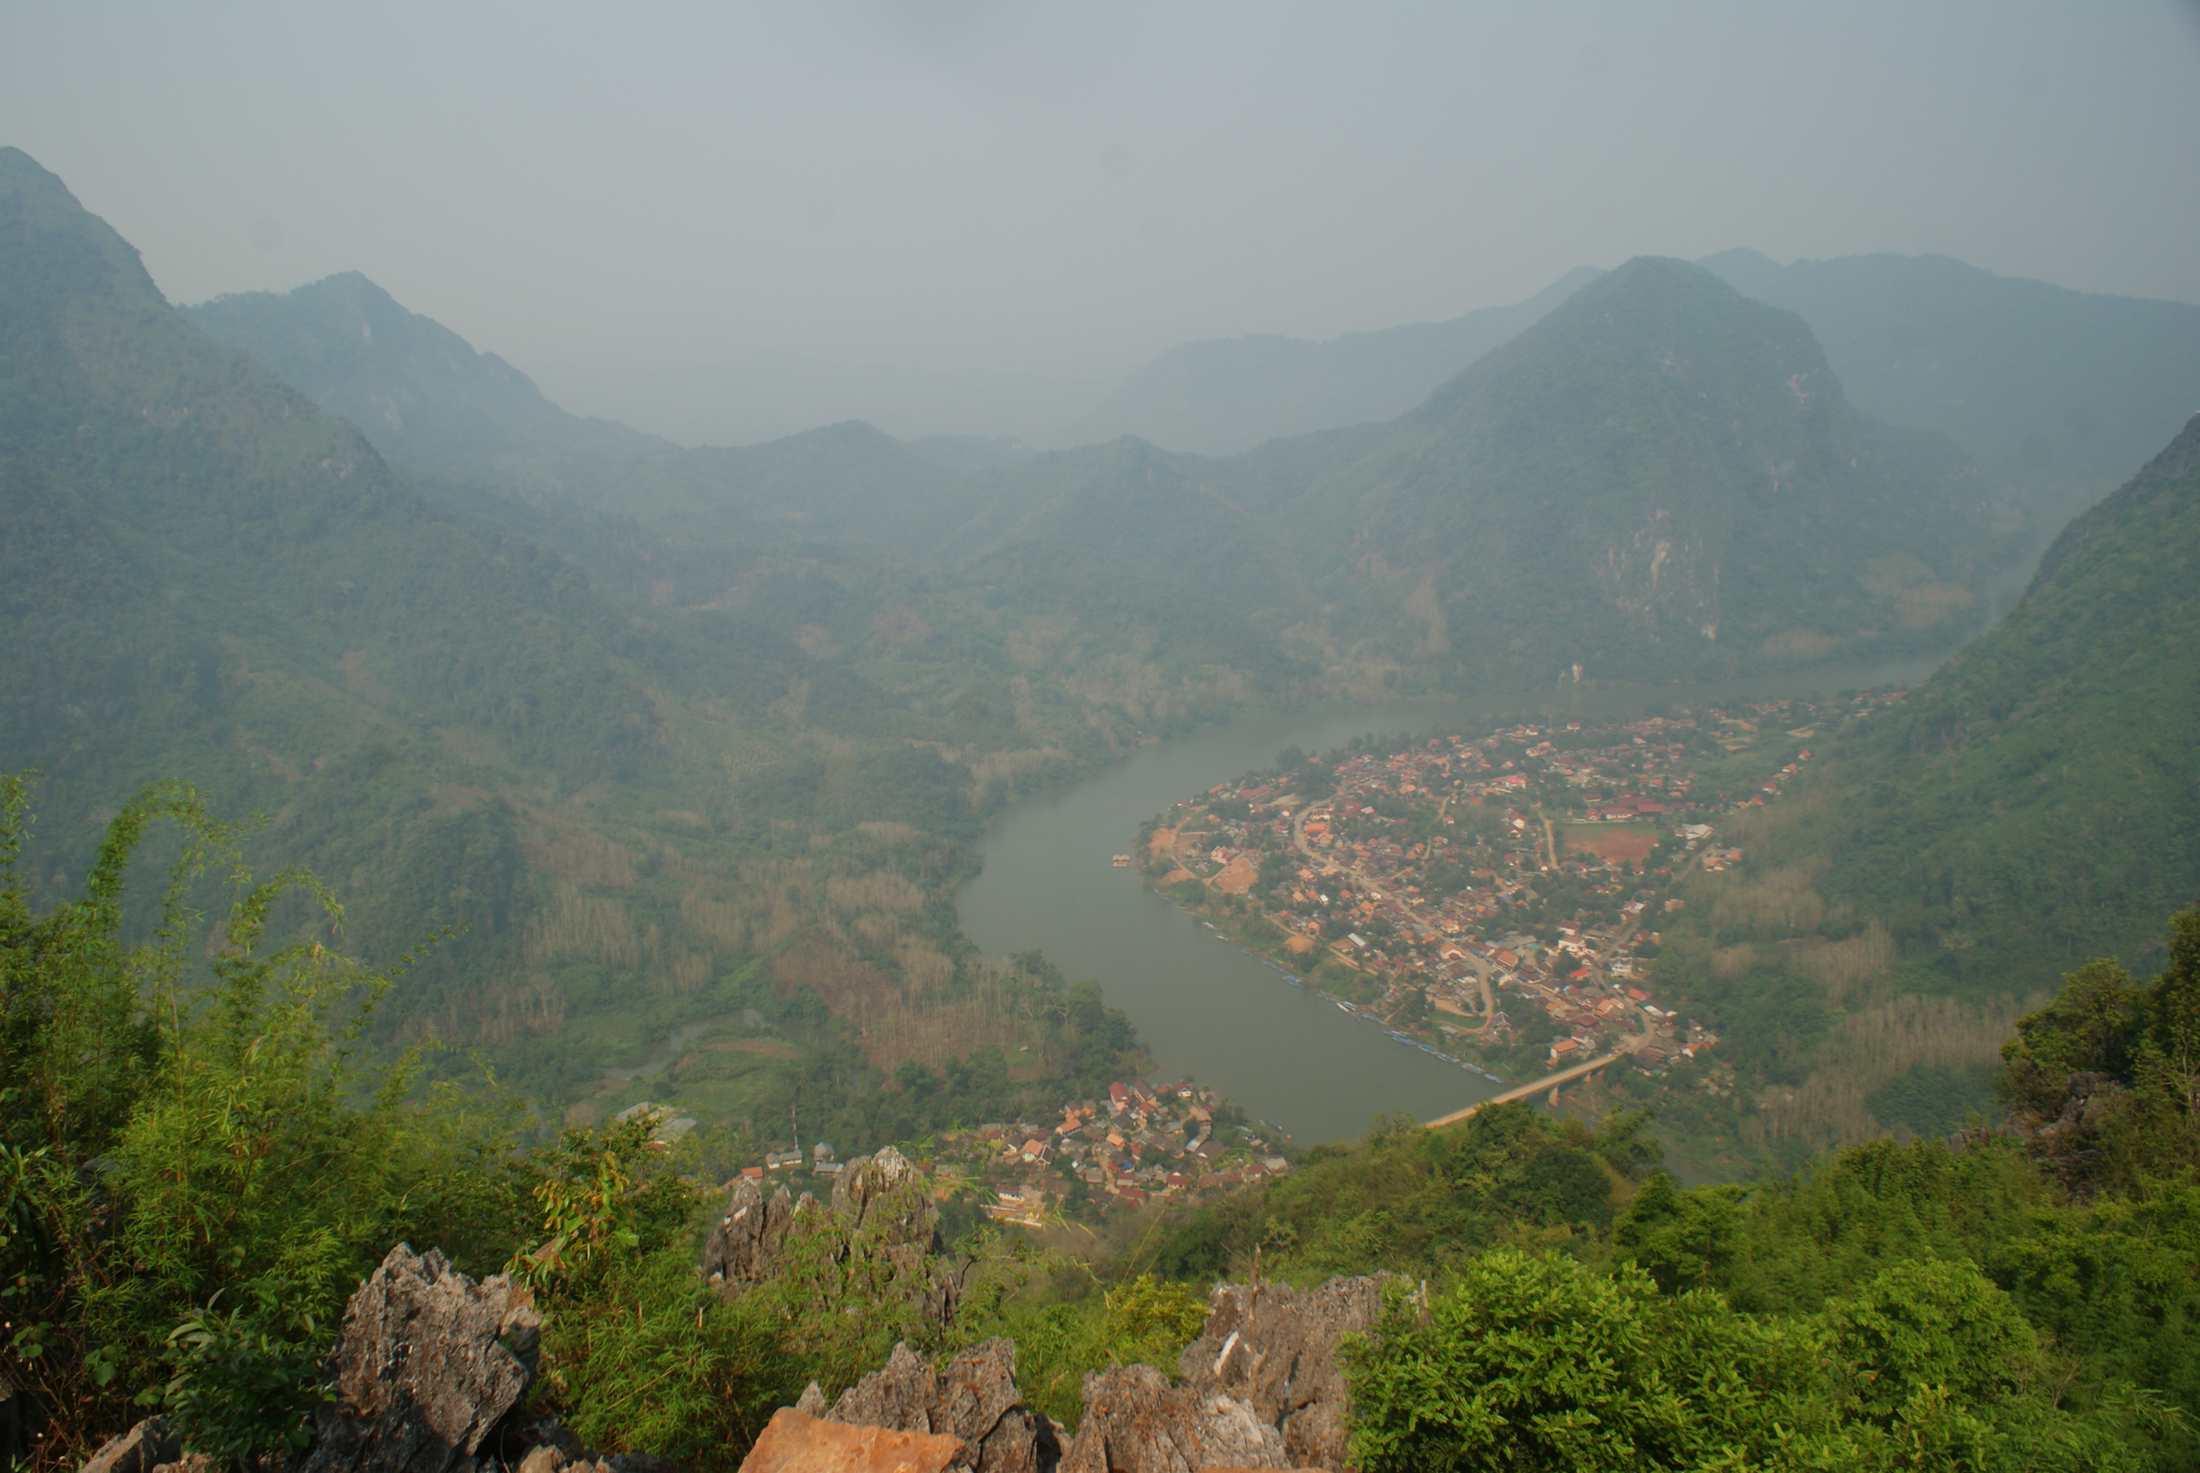 View of the Nong Khiaw town, bridge visible in the bottom part of the picture